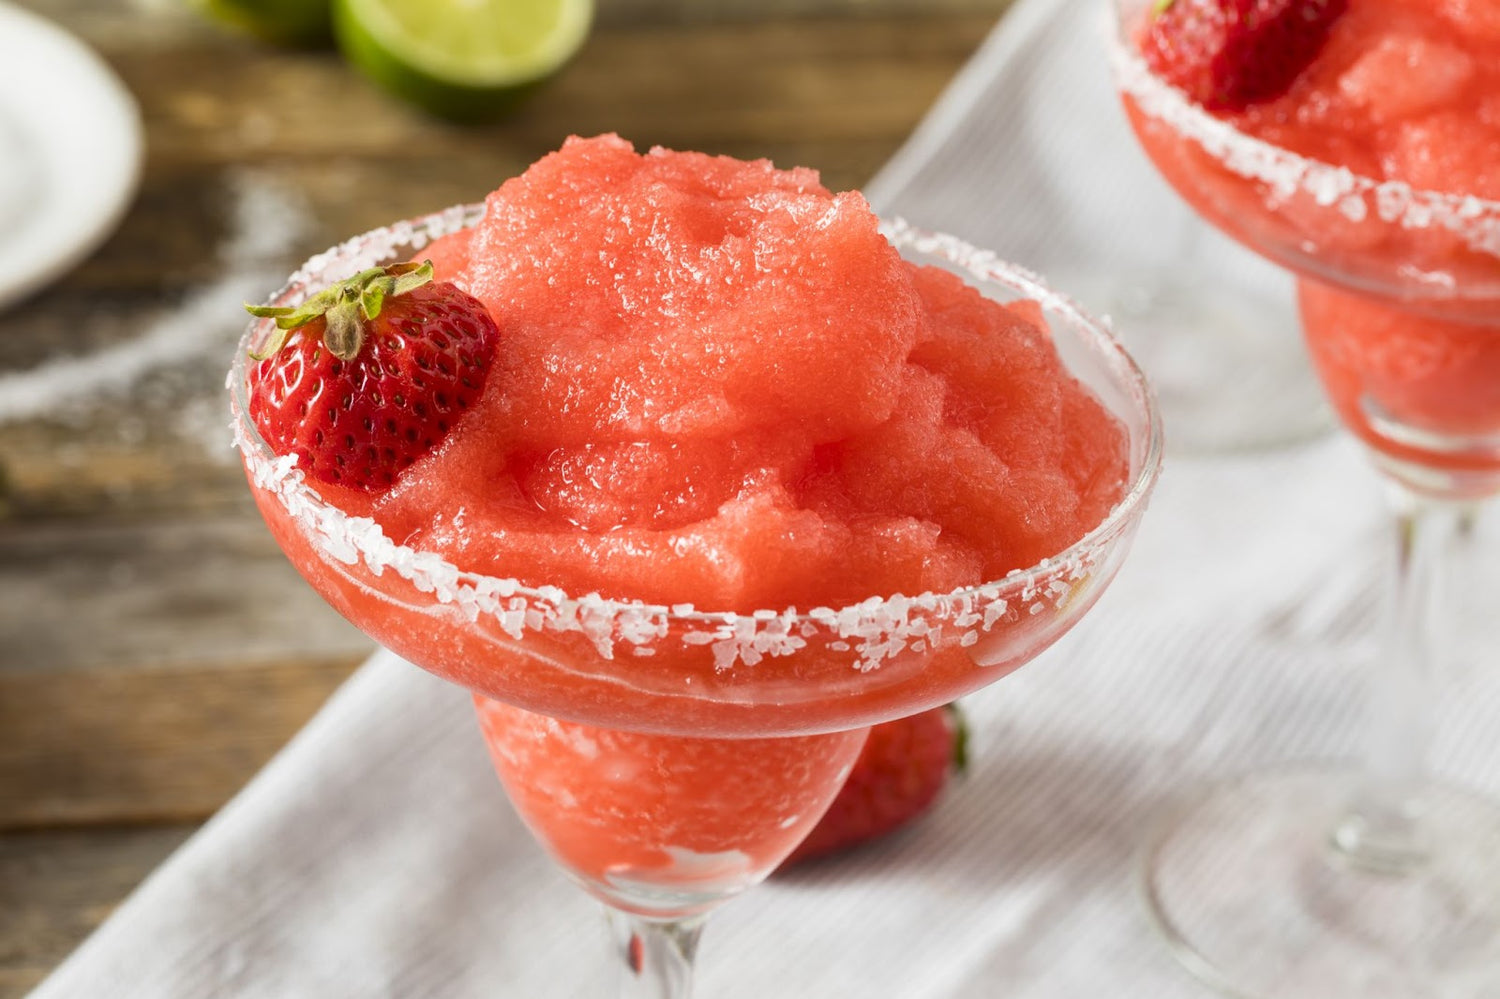 How to Make a Frozen Strawberry Daiquiri at Home